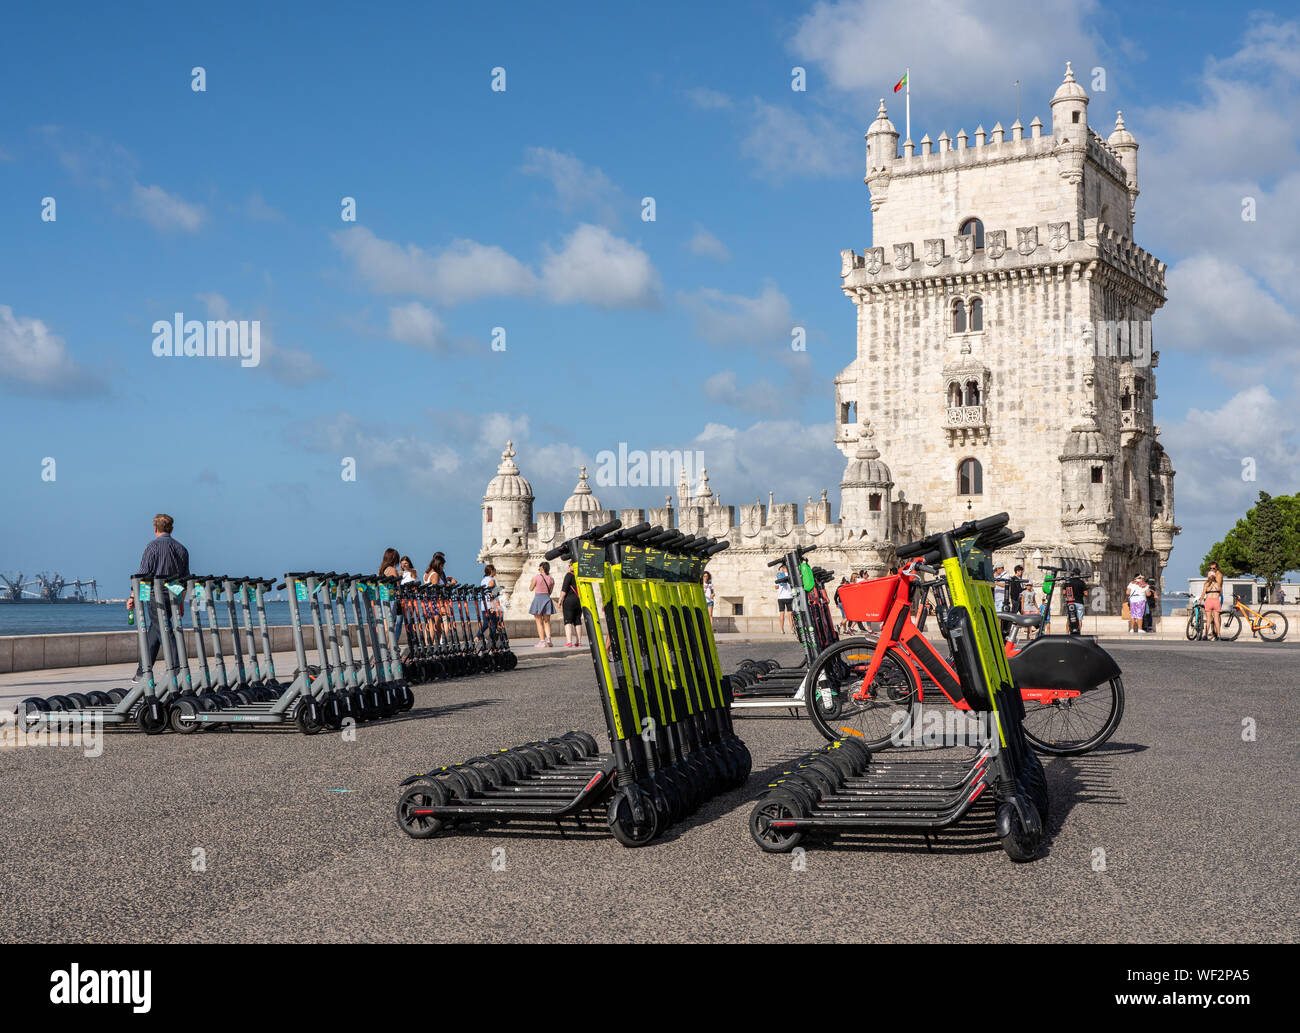 Mulitple electric scooters in Lisbon by the Belem Tower Stock Photo